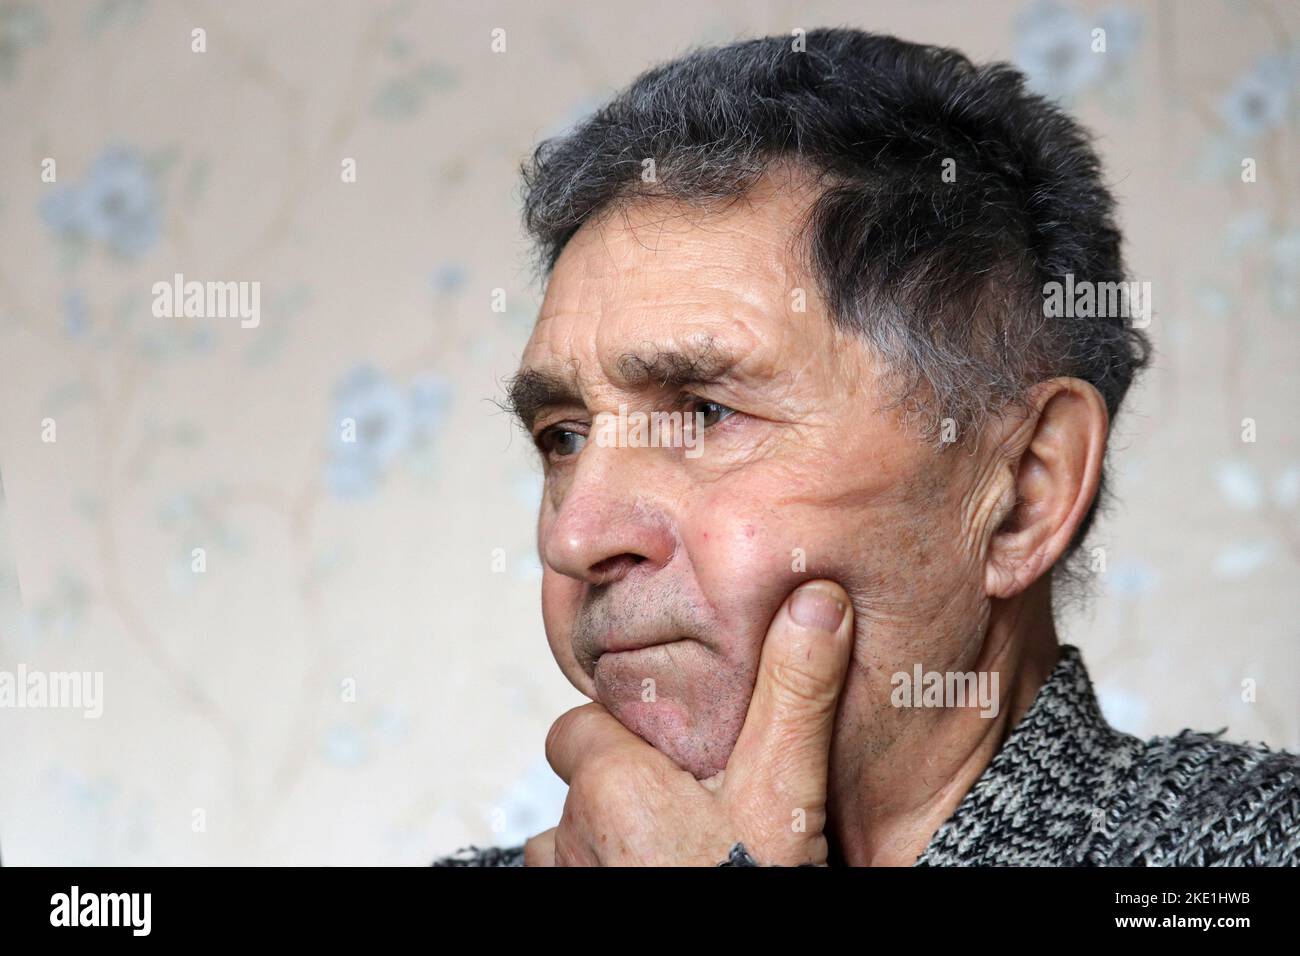 Portrait of elderly man thinking about something. Concept of brain activity in old age and wisdom Stock Photo